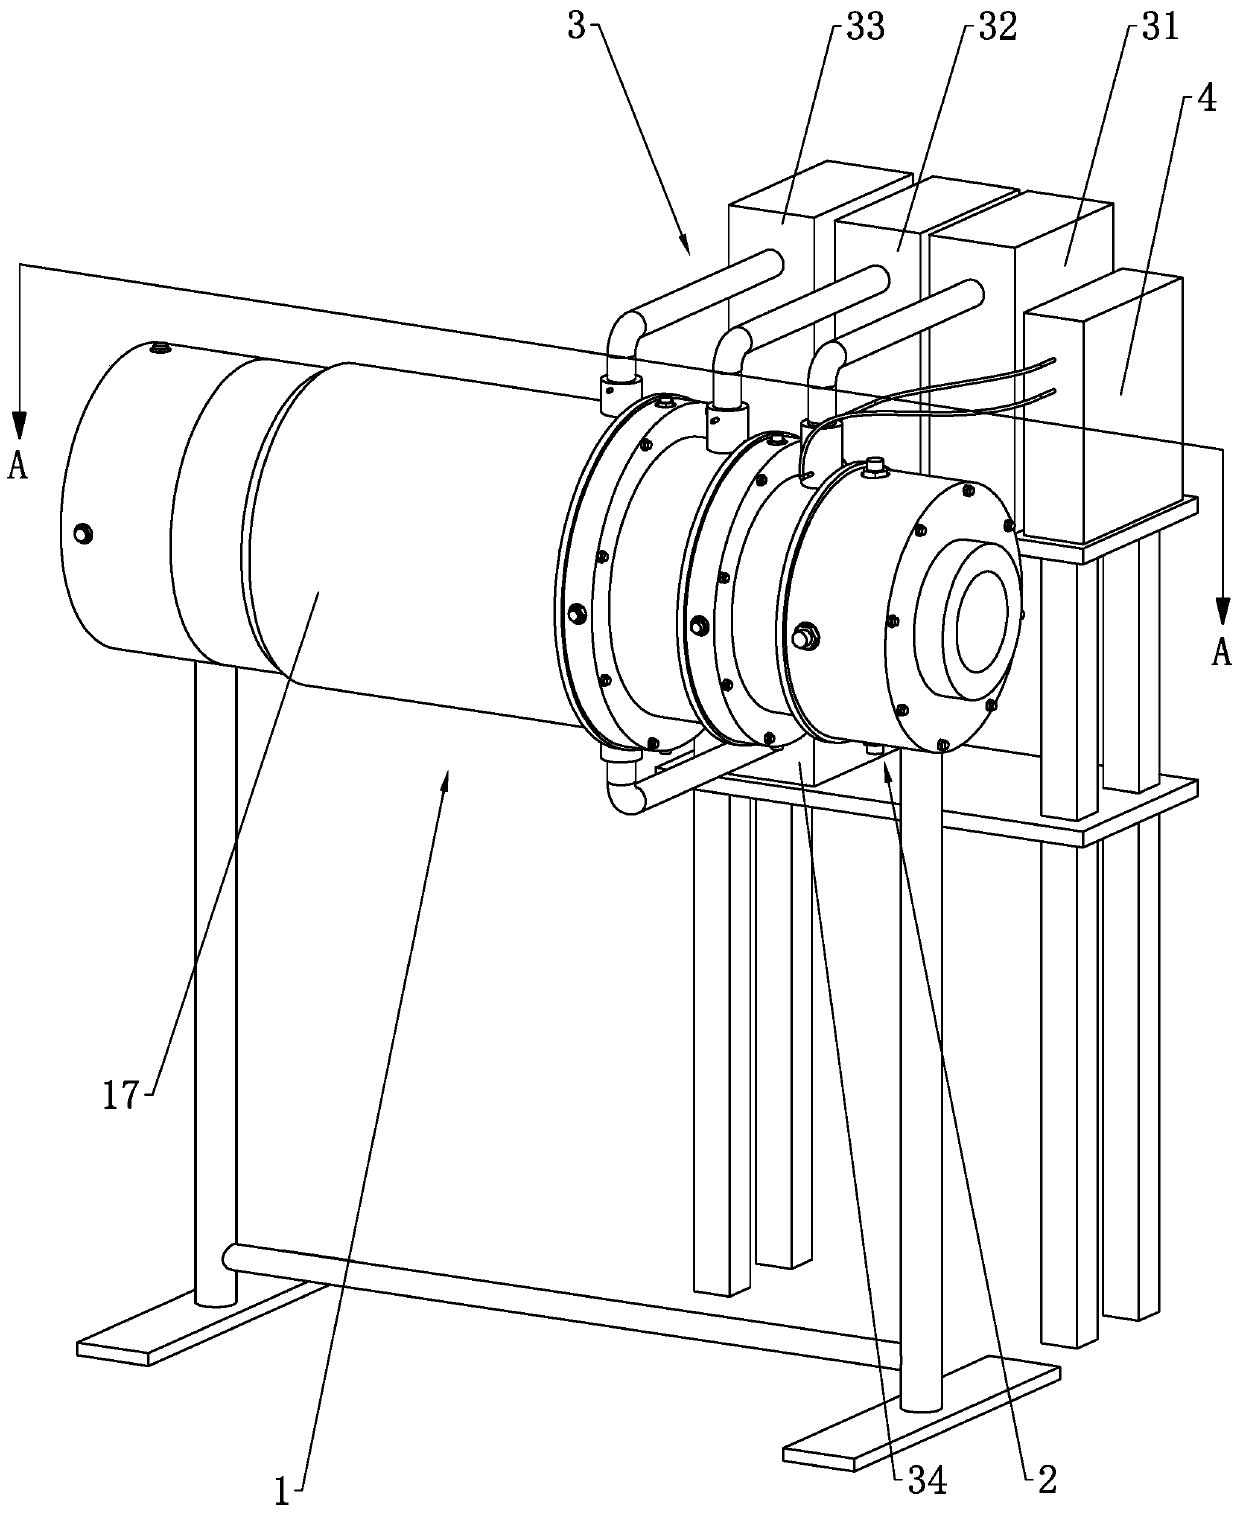 Dual-colored cable three-layer co-extrusion device